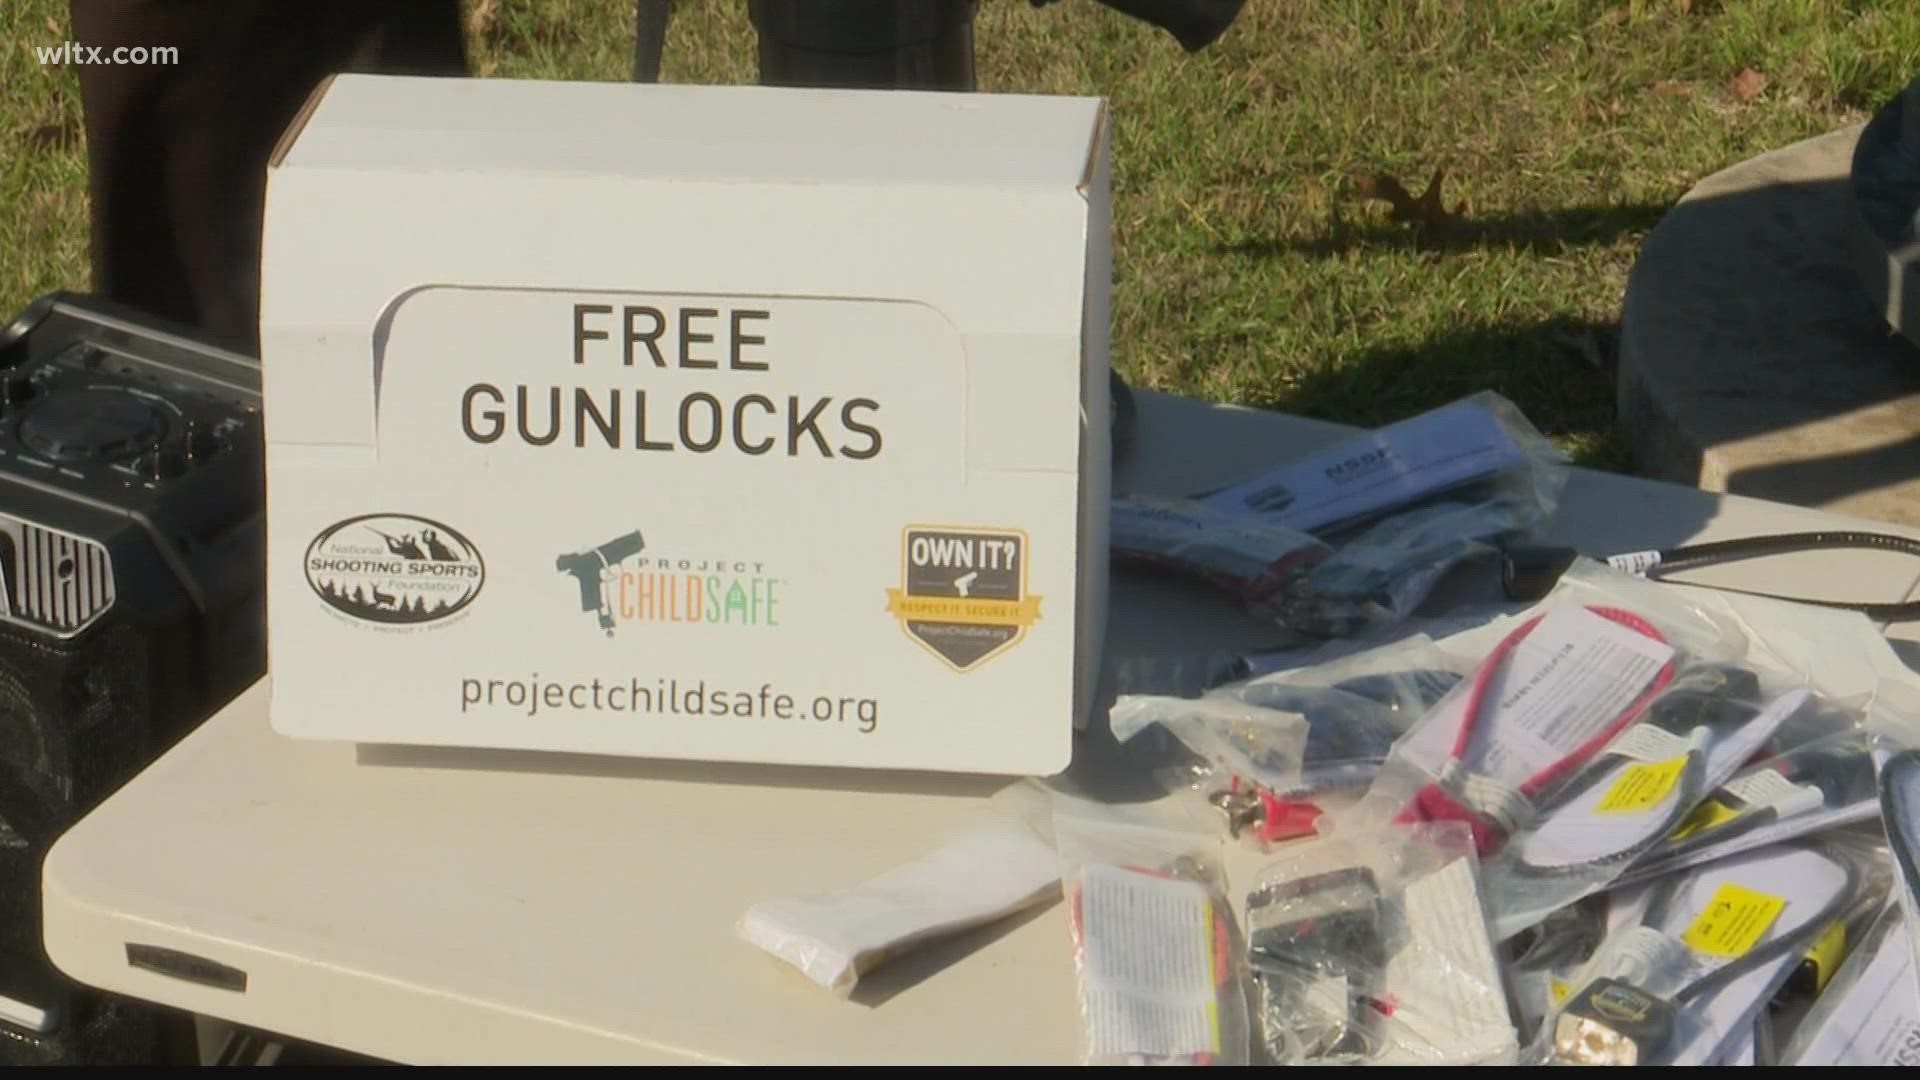 Free gunlocks were handed out at the rally.